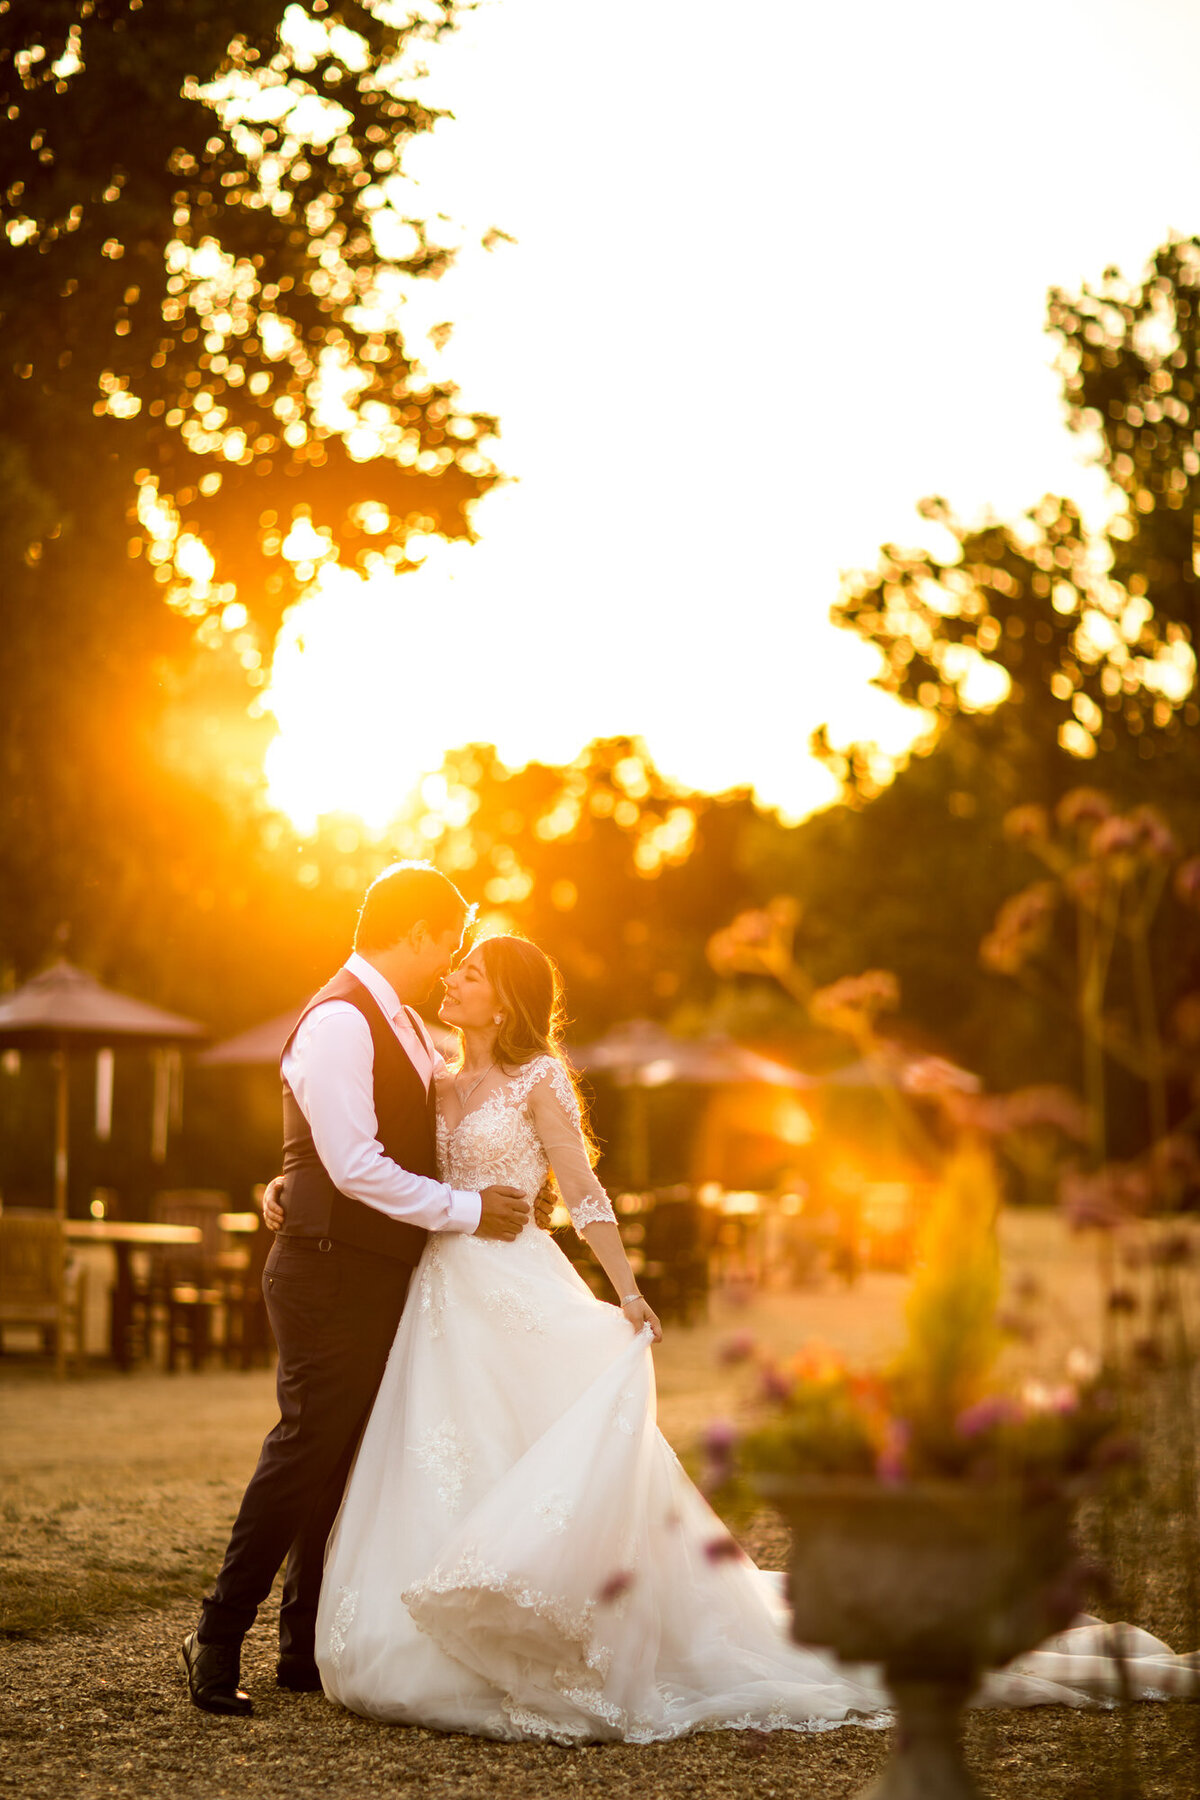 Bride with ballgown dress at sunset with groom